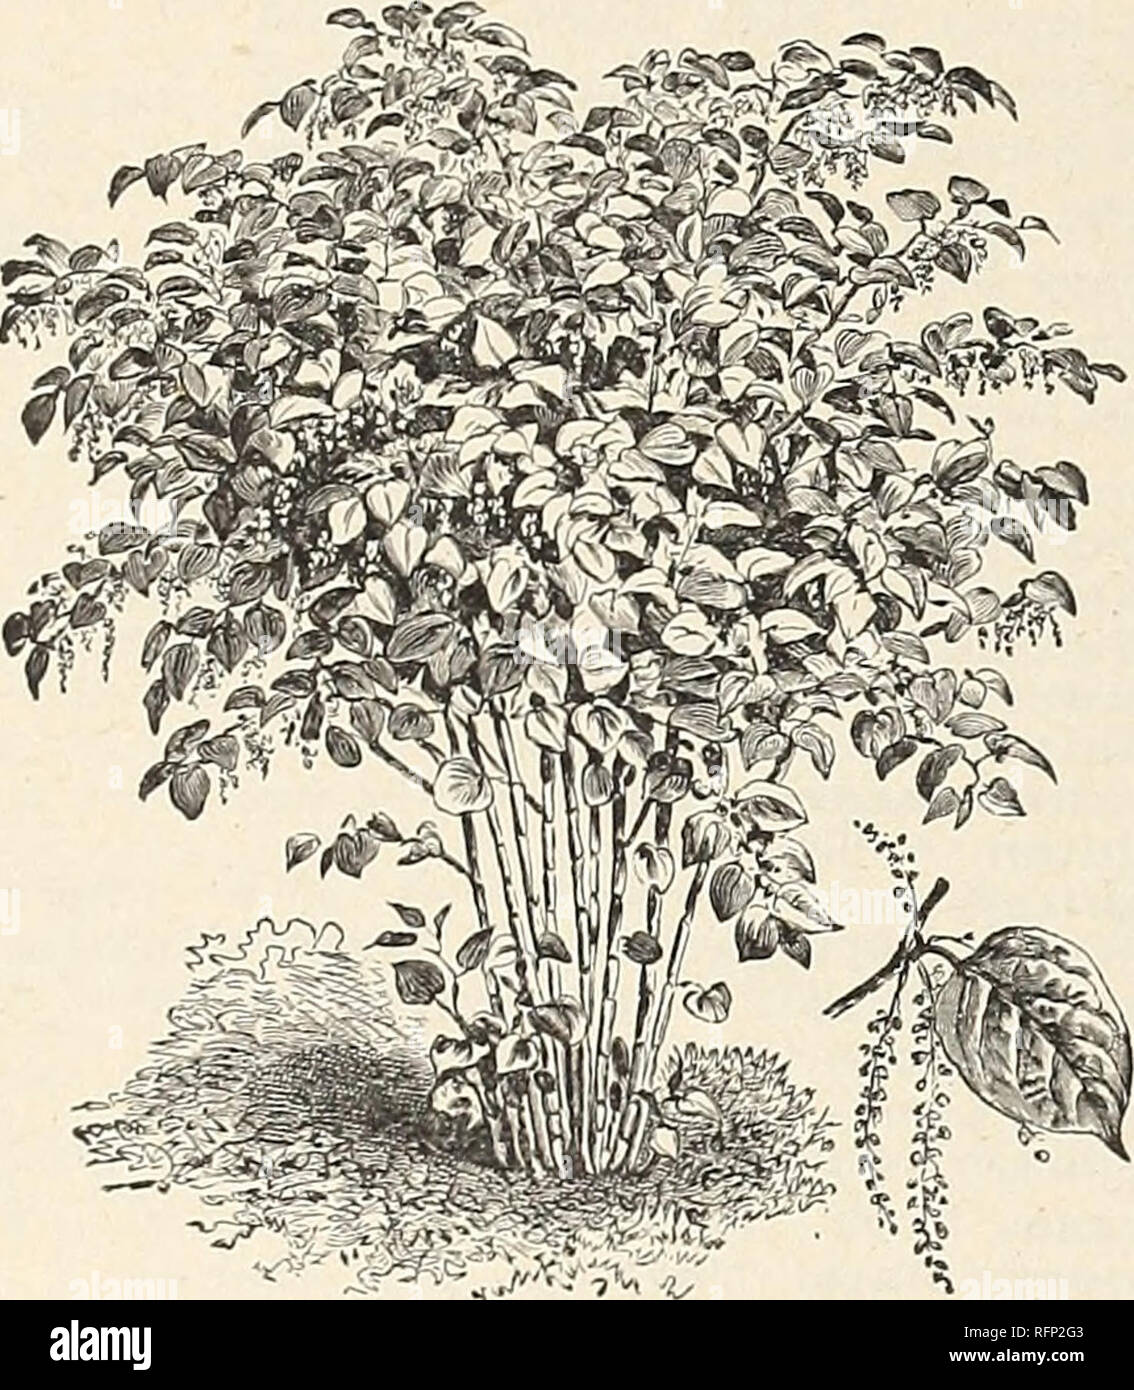 . Descriptive catalogue of ornamental trees, shrubs, vines, evergreens, hardy plants and fruits. Nurseries (Horticulture) Pennsylvania Catalogs; Trees Seedlings Catalogs; Ornamental shrubs Catalogs; Flowers Catalogs; Fruit Catalogs; Nurseries (Horticulture); Trees; Ornamental shrubs; Flowers; Fruit. Pycnanthemum MnifOlium. White. August to October. 2% feet $ IS each $1 25 per 10 &quot; muticum. White. August to October, 2 feet 15 &quot; 1 25 &quot; 10 Pyrethrum roseum. Rose. June and July. 2 feet 20 &quot; 1 75 &quot; 10 This is one of the prettiest perennials of its season. The flowers are on Stock Photo